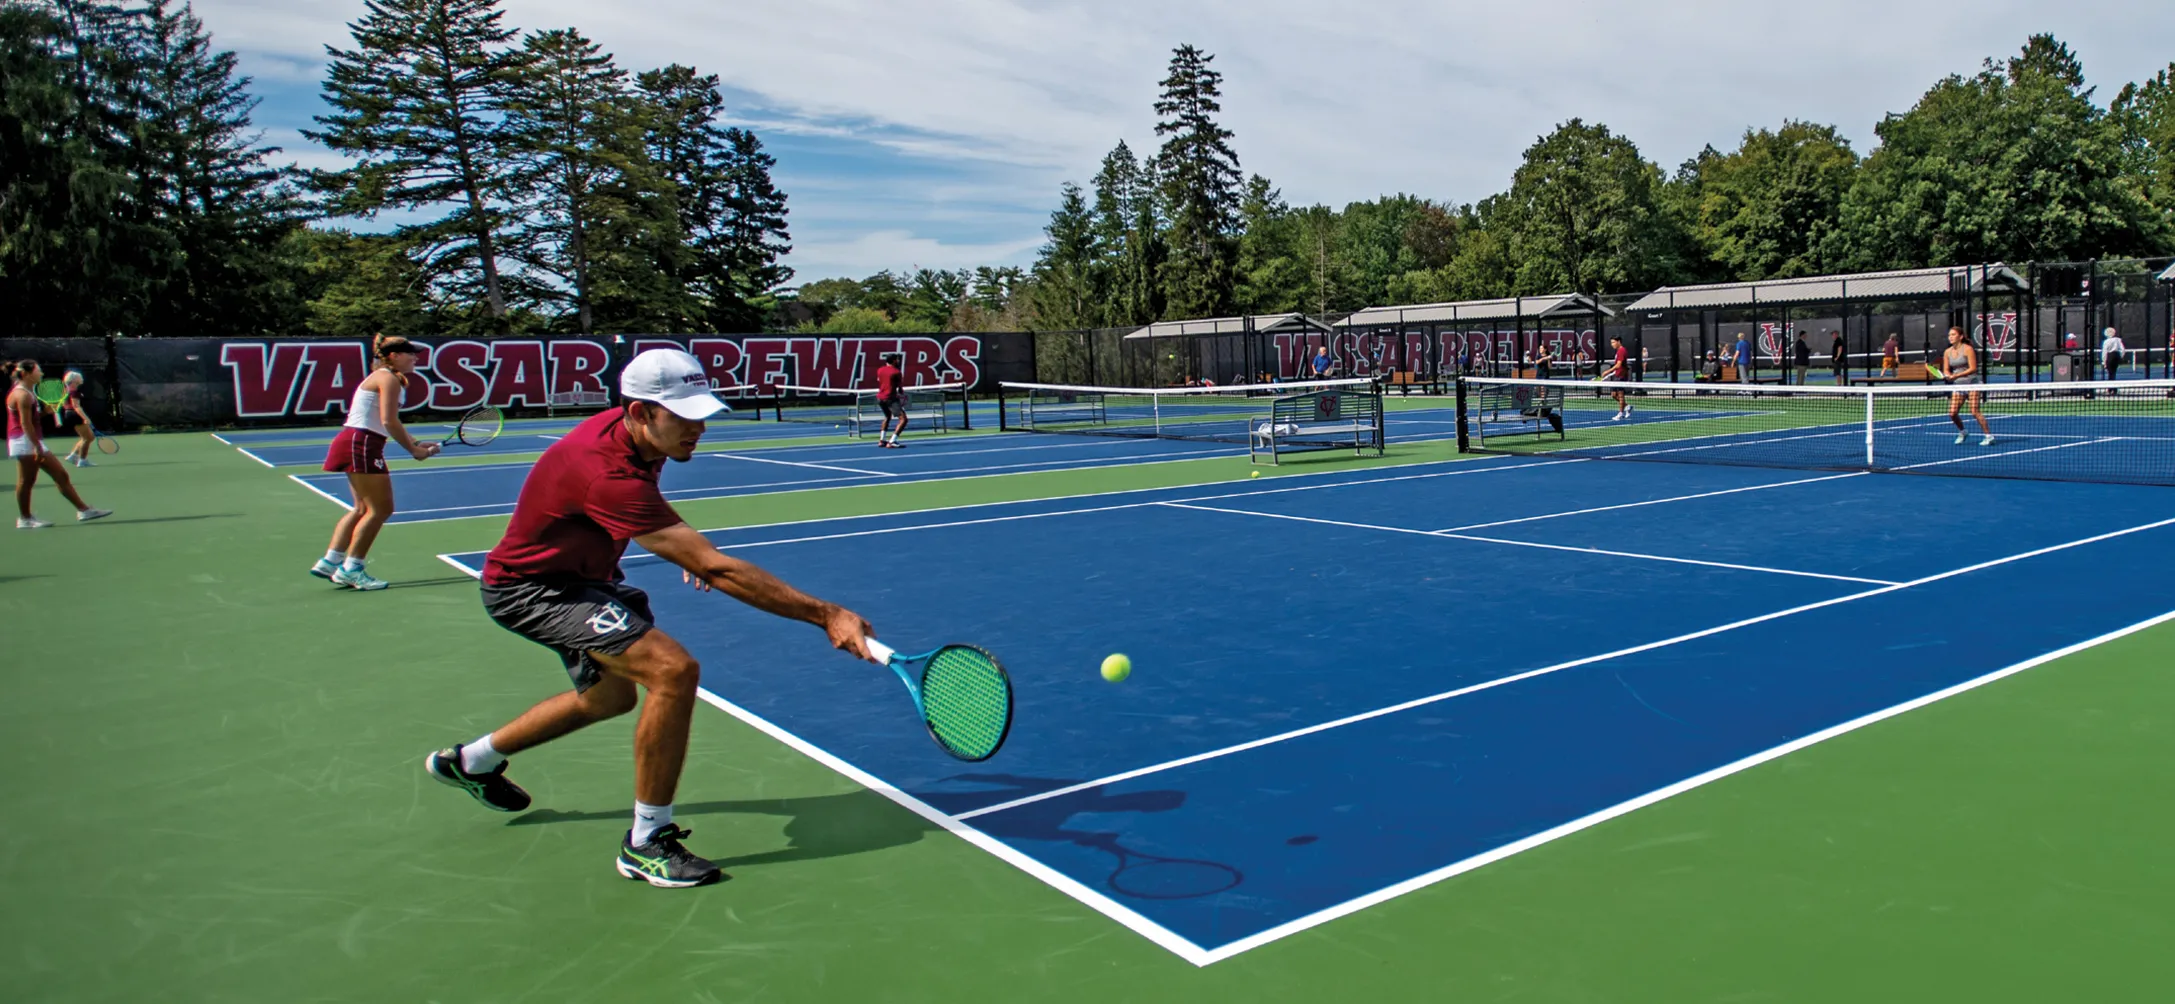 Tennis players in mid game on tennis court